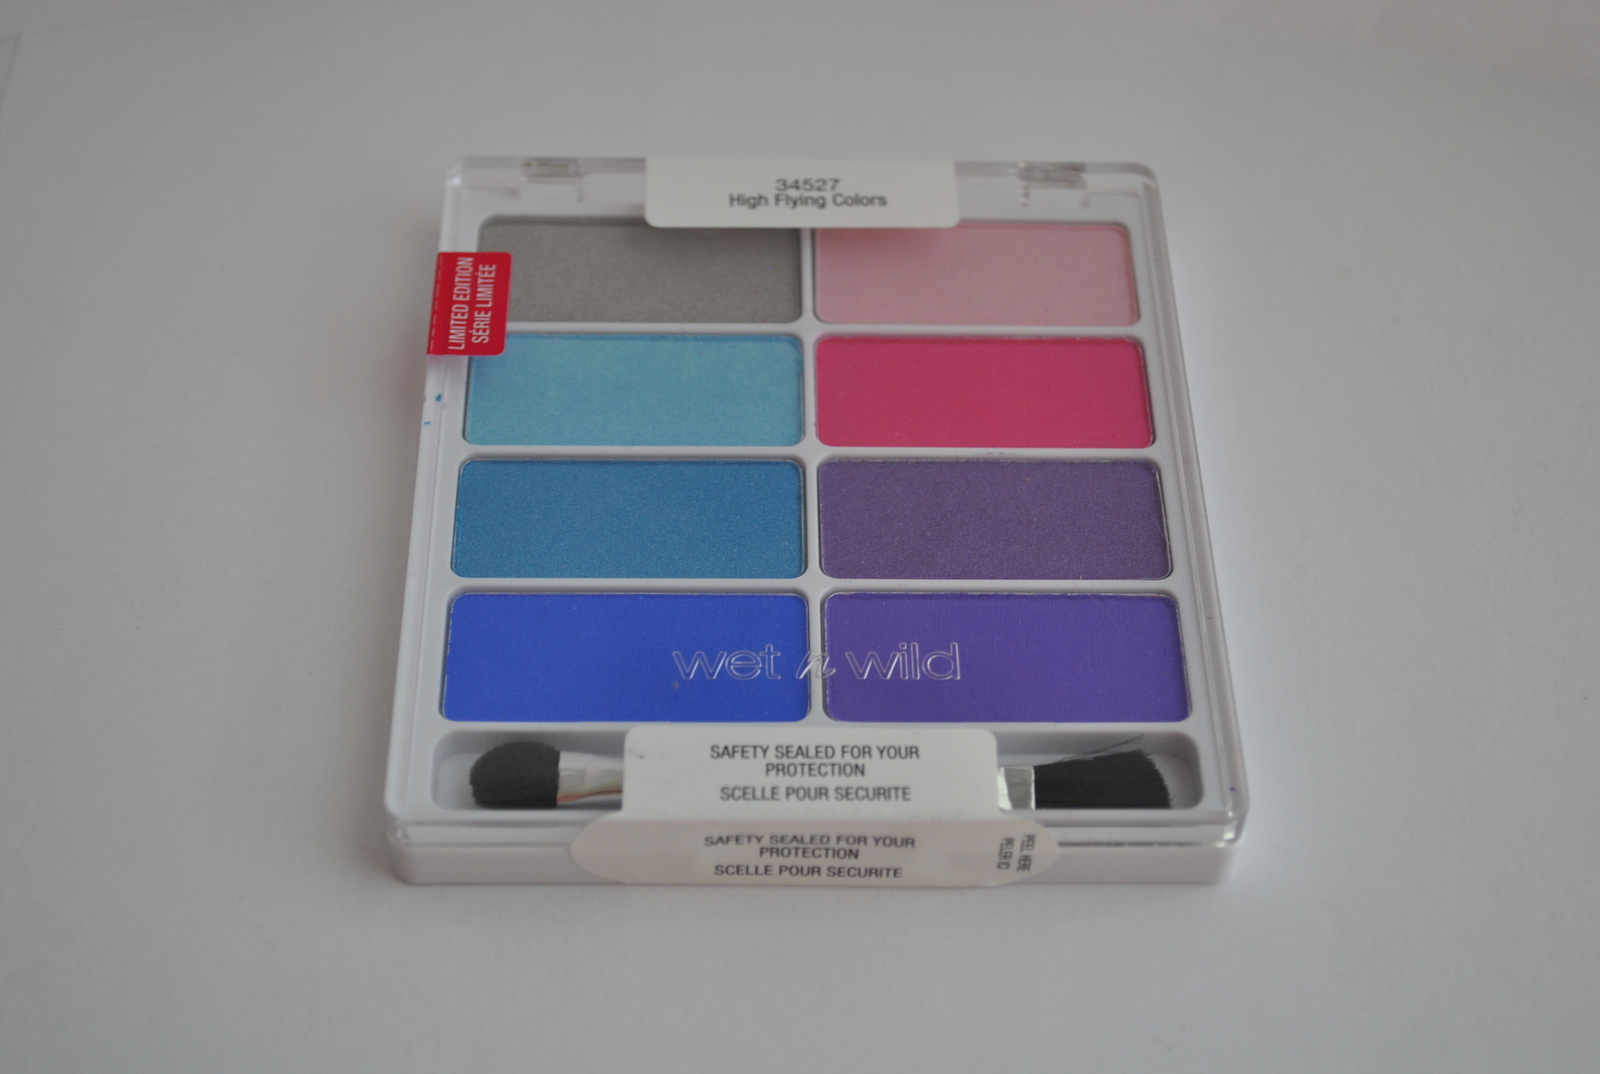 Primary image for Wet N Wild Coloricon Venice Beach Palette - 34527 High Flying Colors